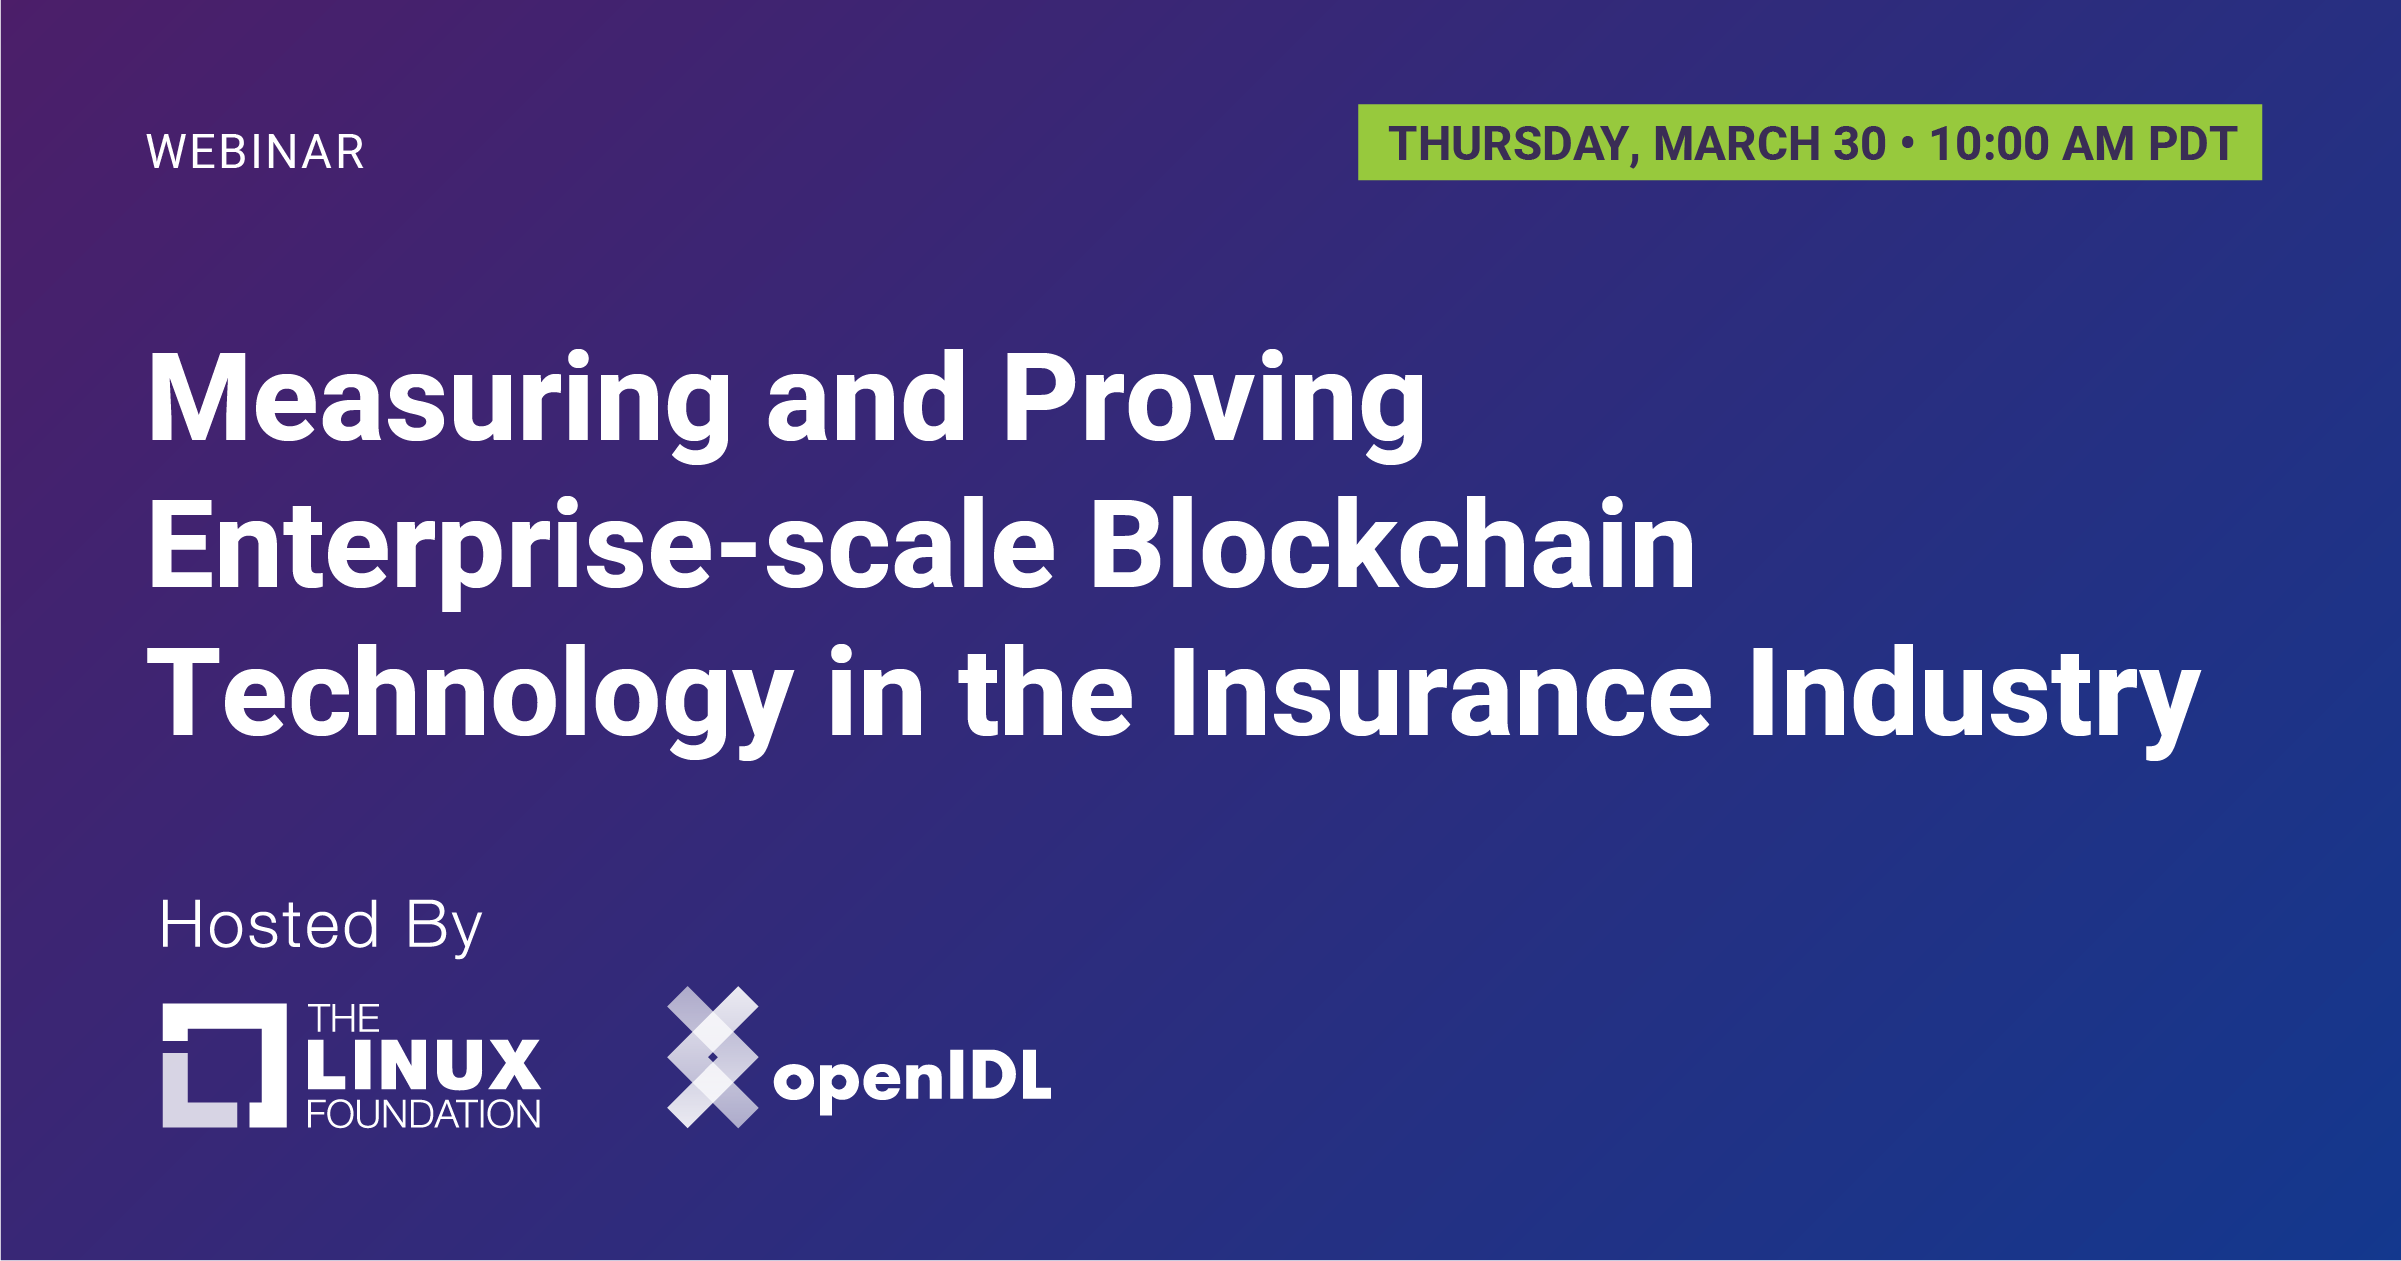 Measuring and Proving Enterprise-scale Blockchain Technology in the Insurance Industry featured image